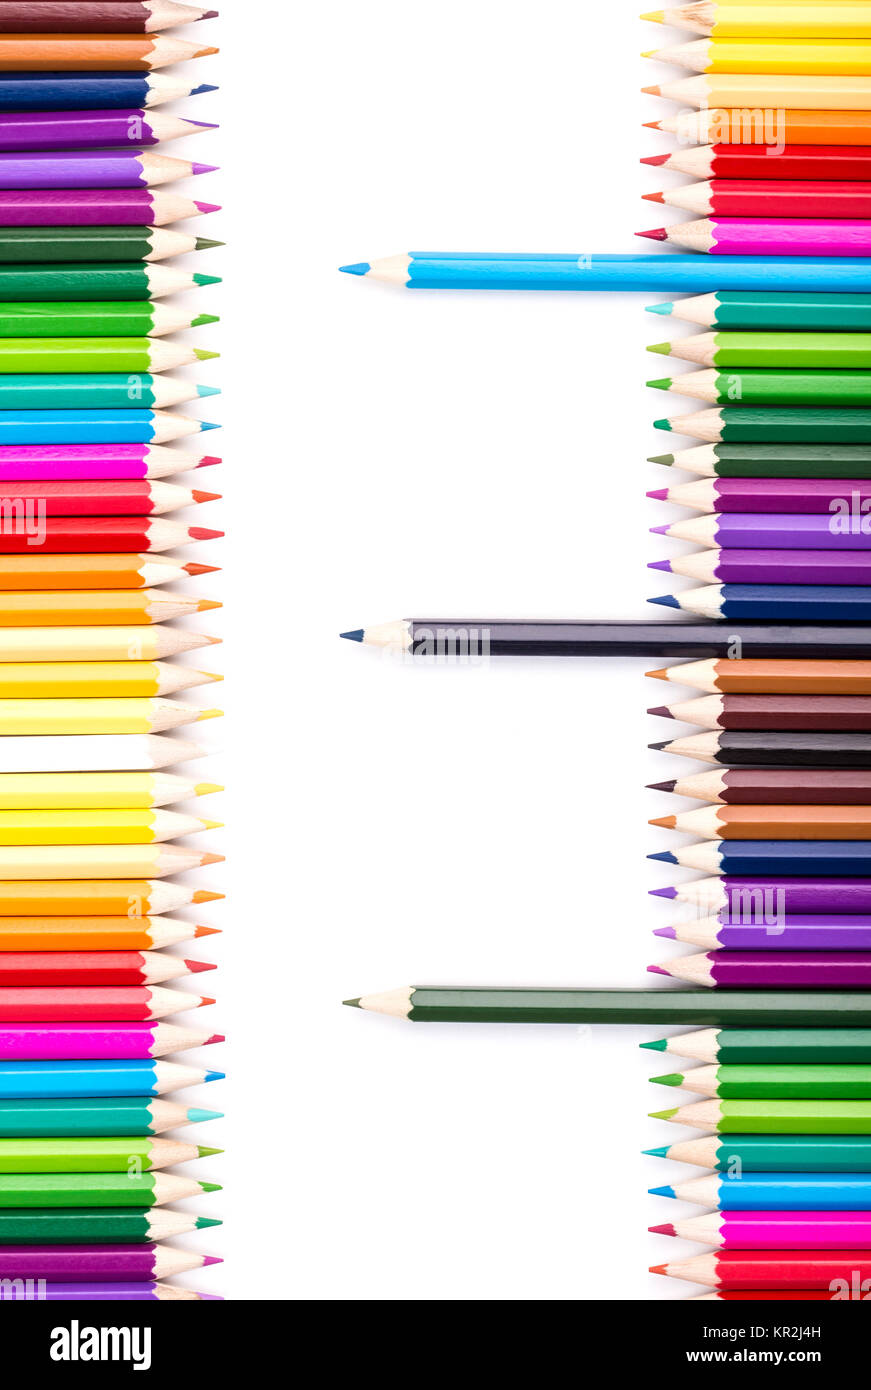 Color pencils with three pencils standing out on right Stock Photo